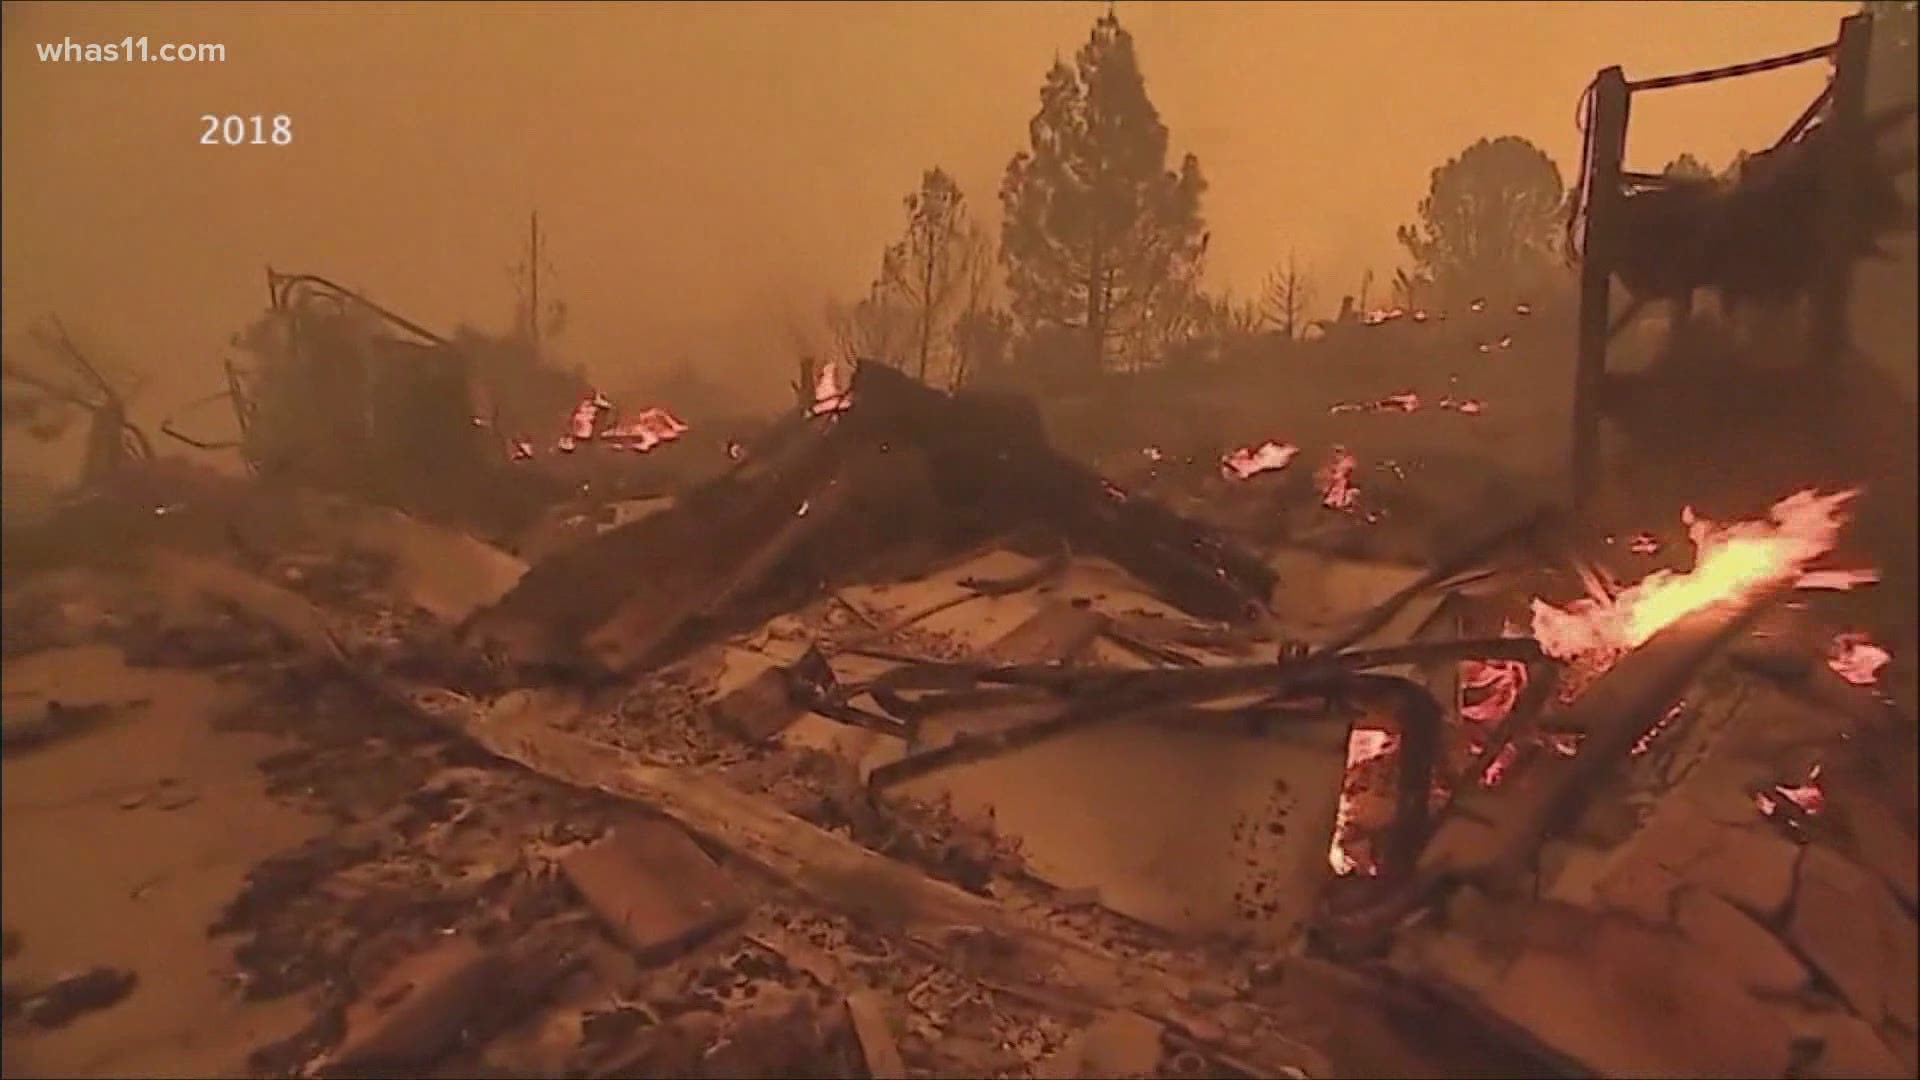 Devastating wildfire conditions in West are expected to worsen.